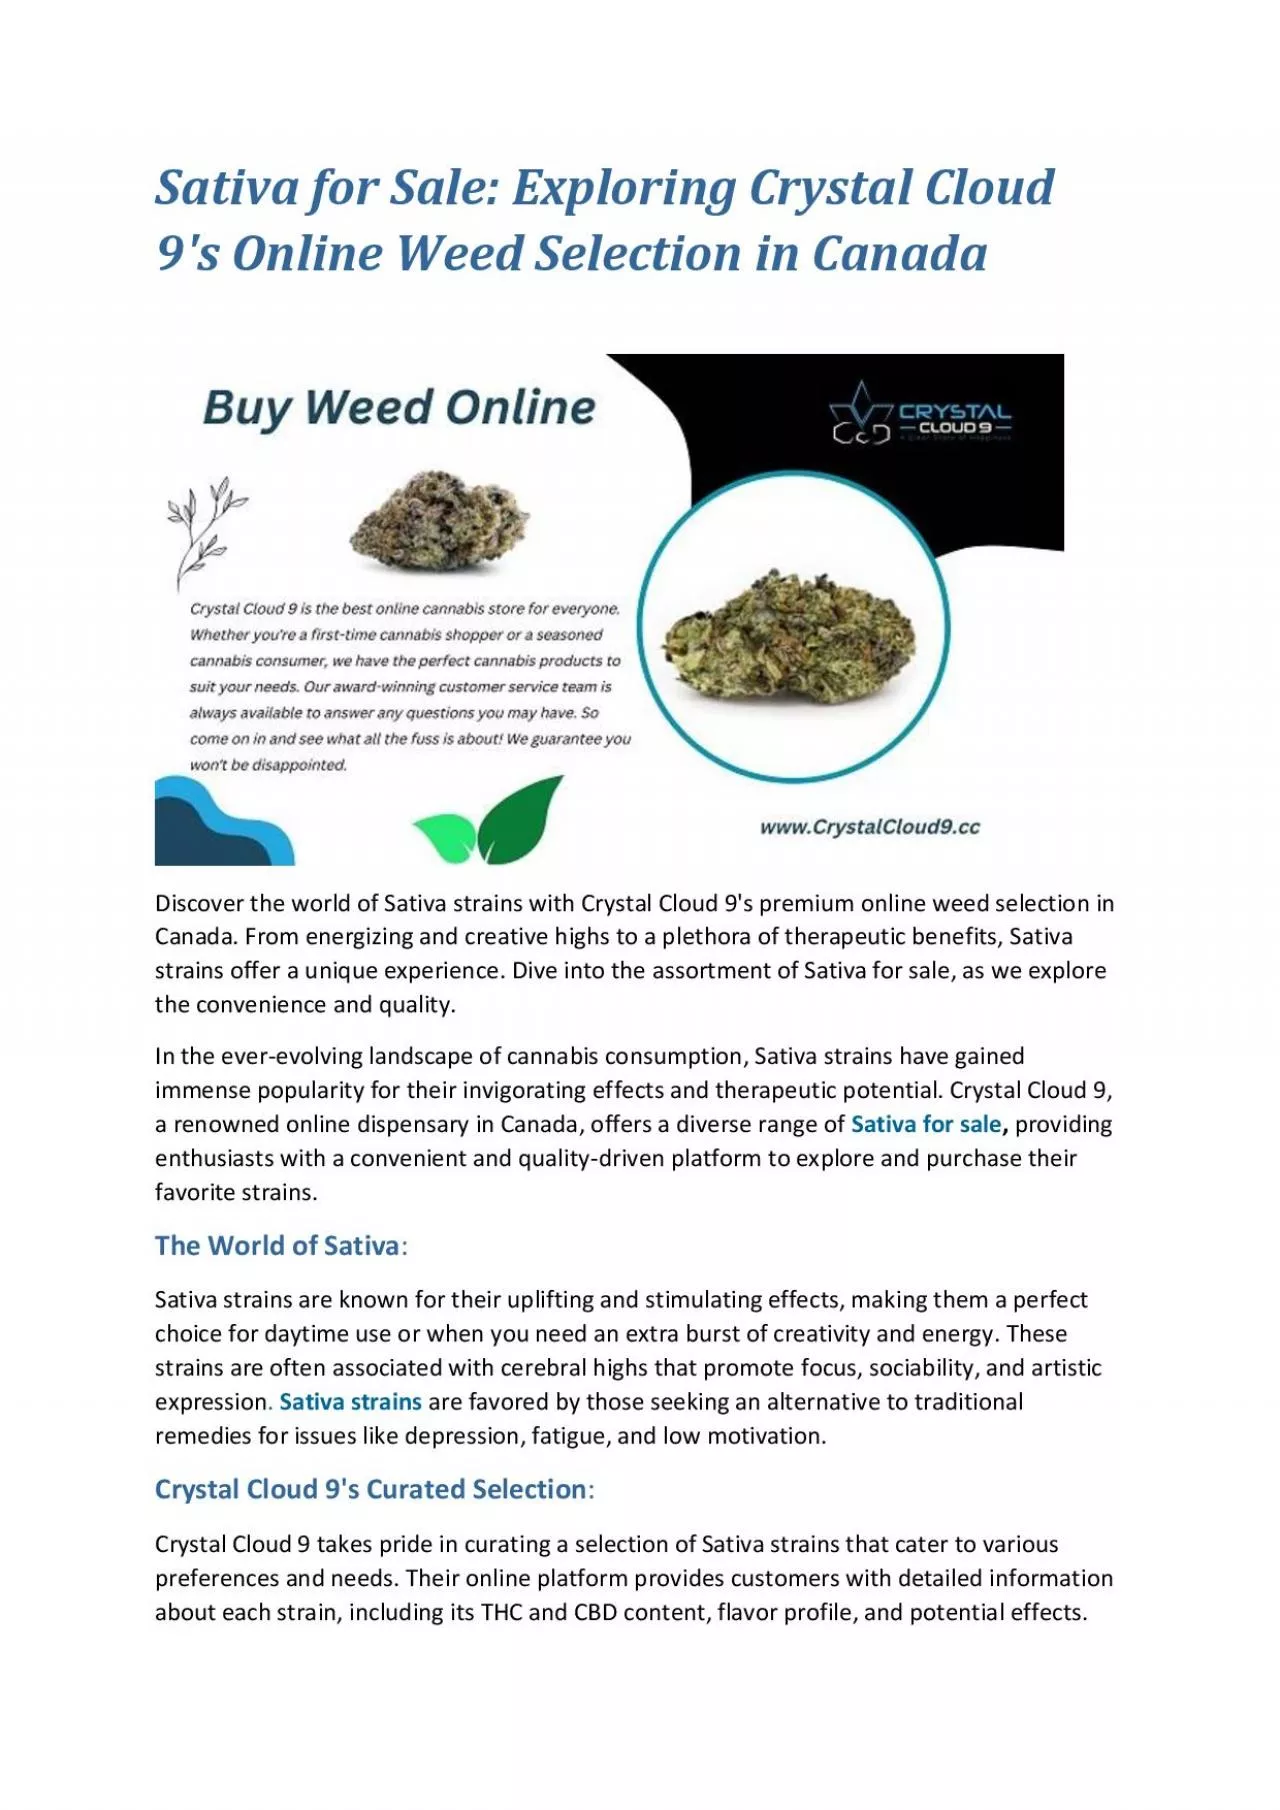 Sativa for Sale: Exploring Crystal Cloud 9\'s Online Weed Selection in Canada